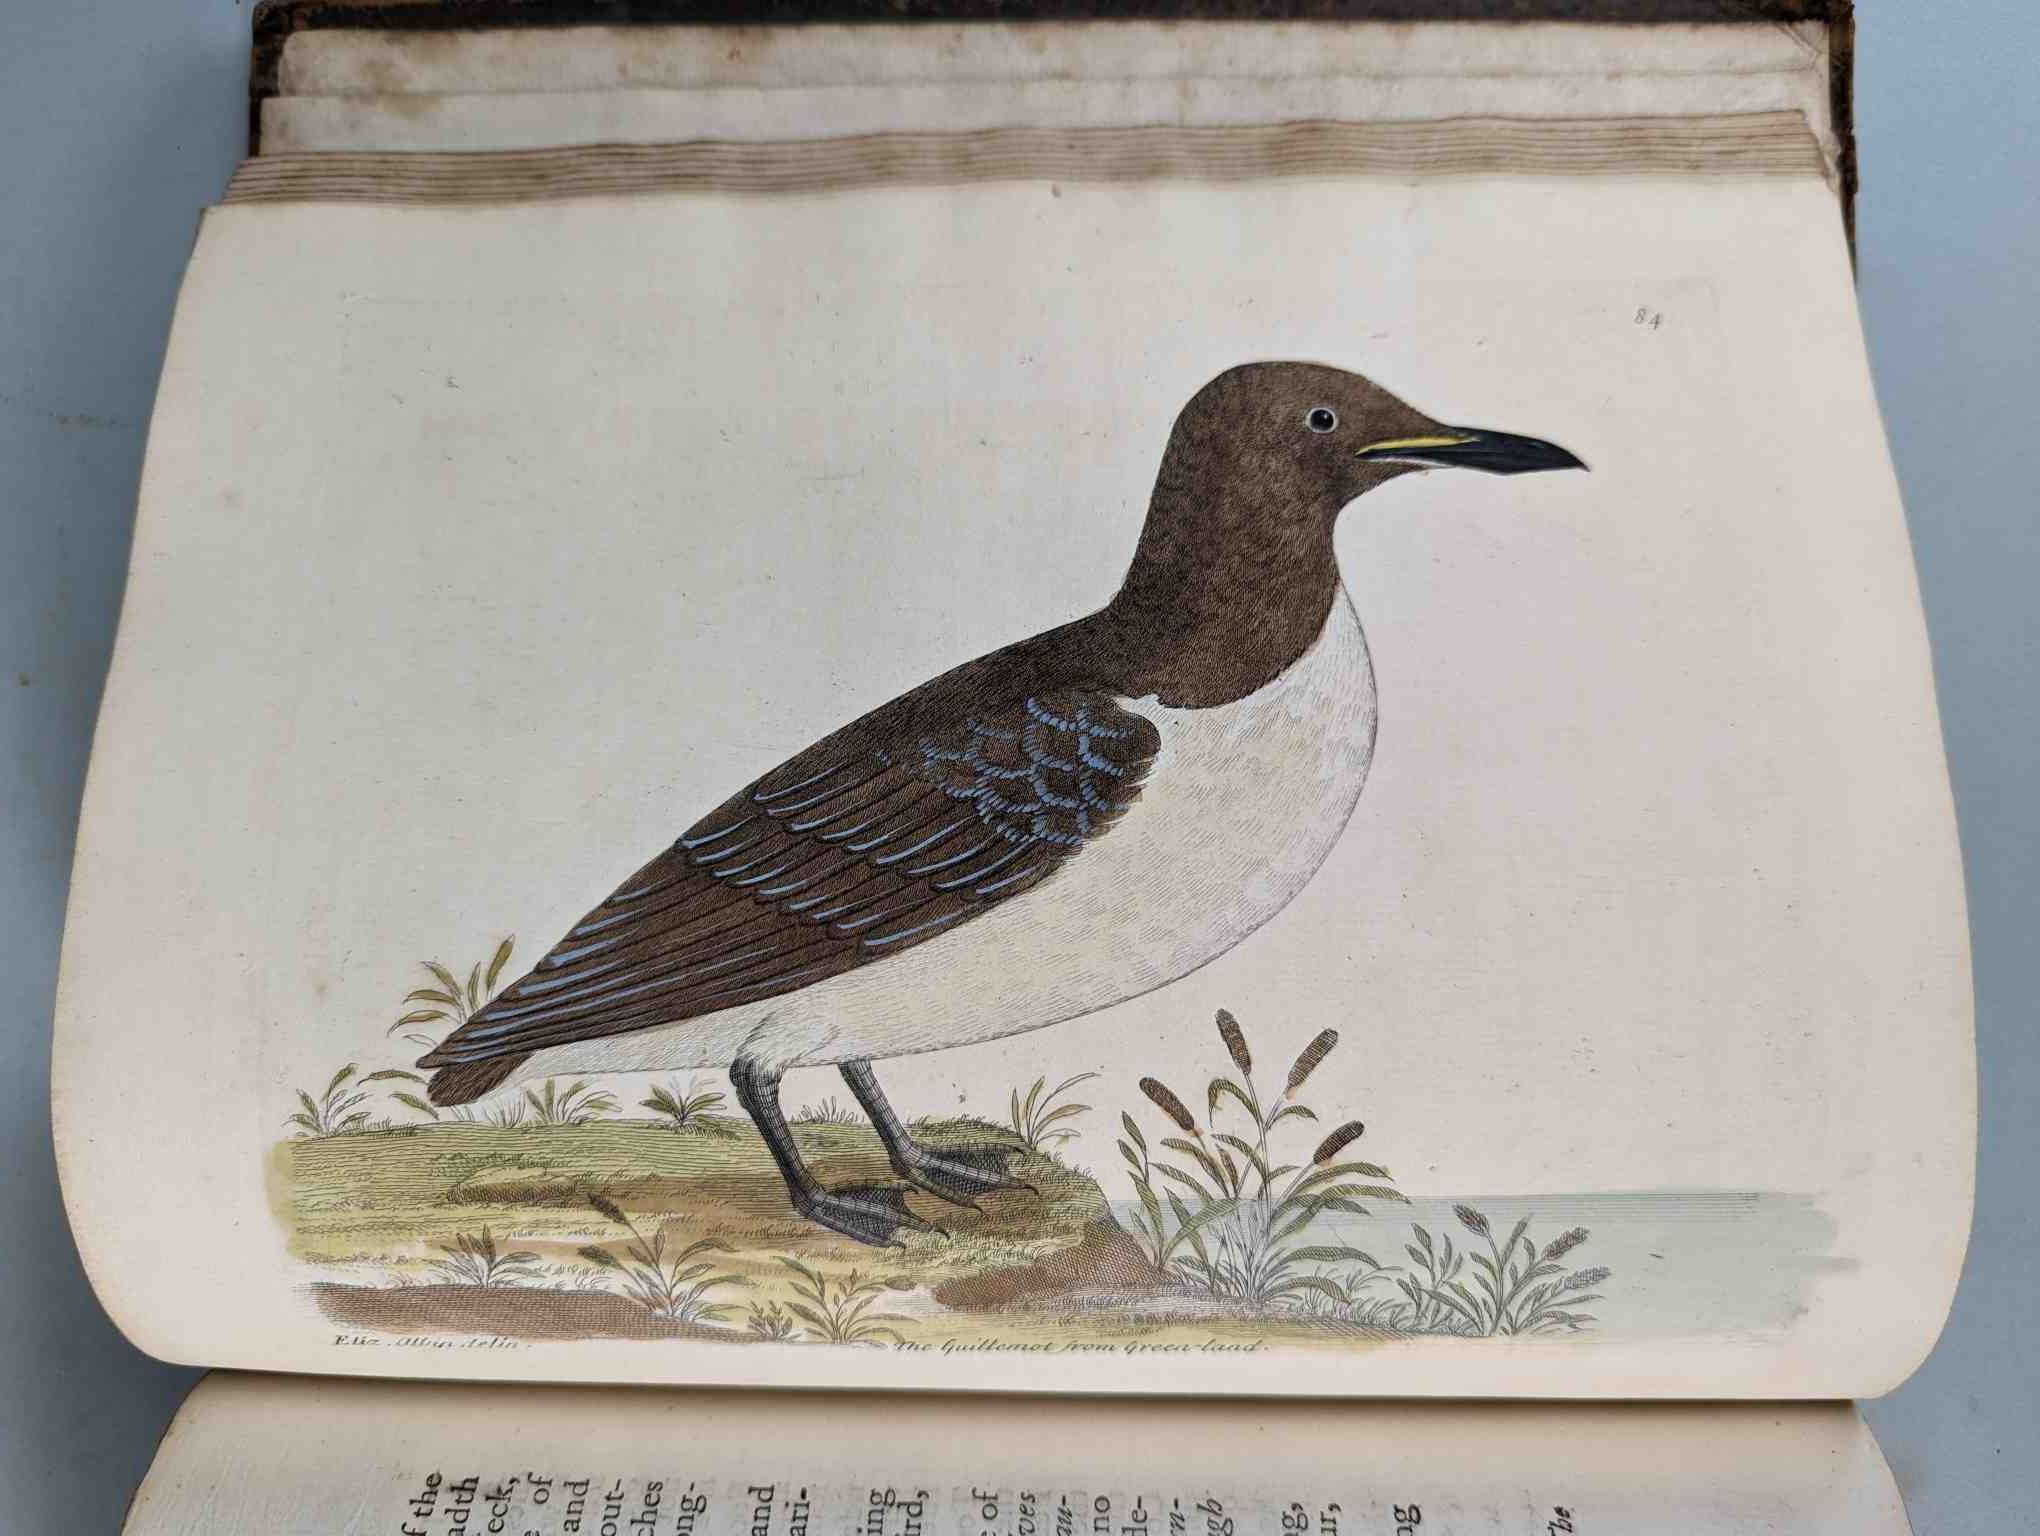 ALBIN, Eleazar. A Natural History of Birds, to which are added, Notes and Observations by W. - Image 87 of 208